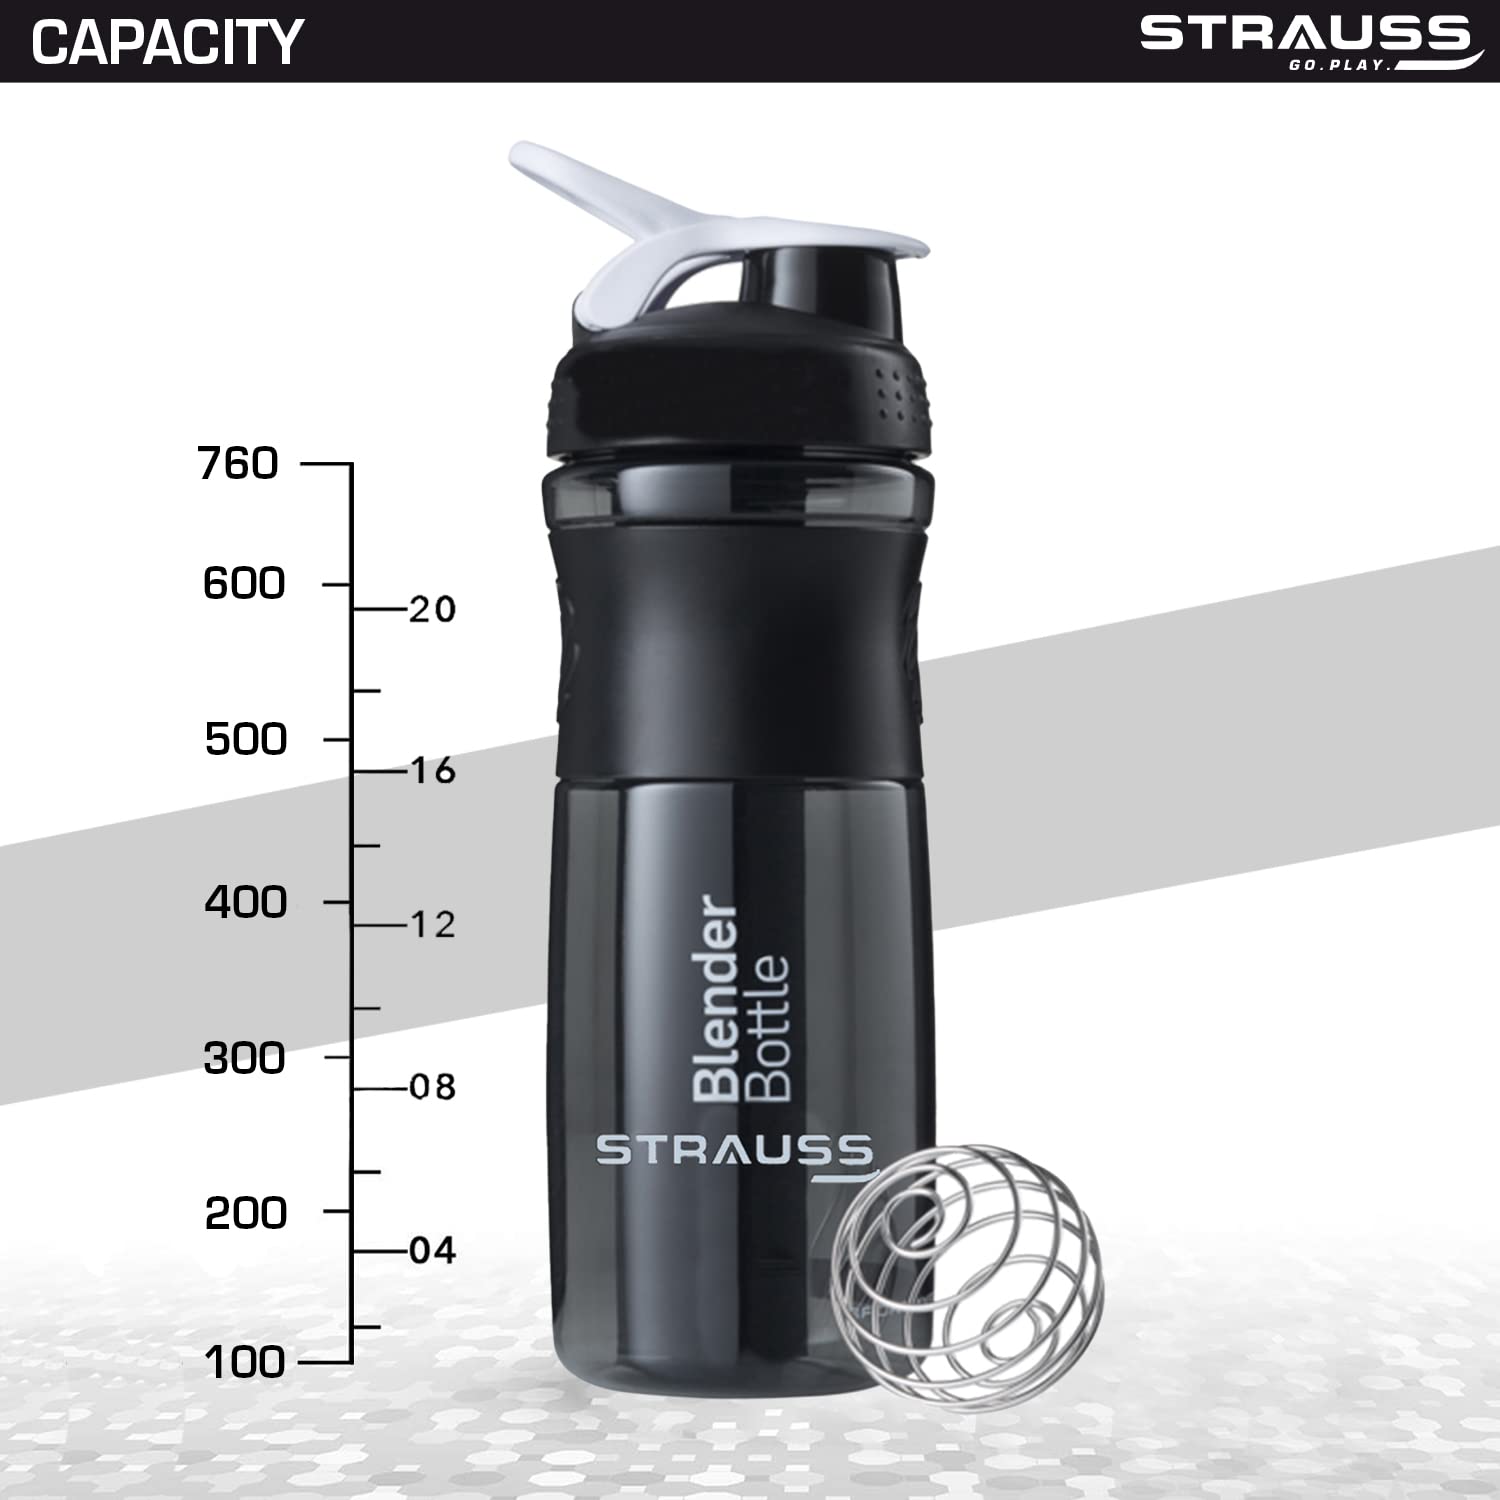 Strauss Blender Shaker Sipper Bottle 760ml | Ideal for Protein, Pre Workout And BCAAs & Water | High-quality BPA Free Material with 100% Leakproof Guarantee | Rounded corners for easy cleaning (Black)